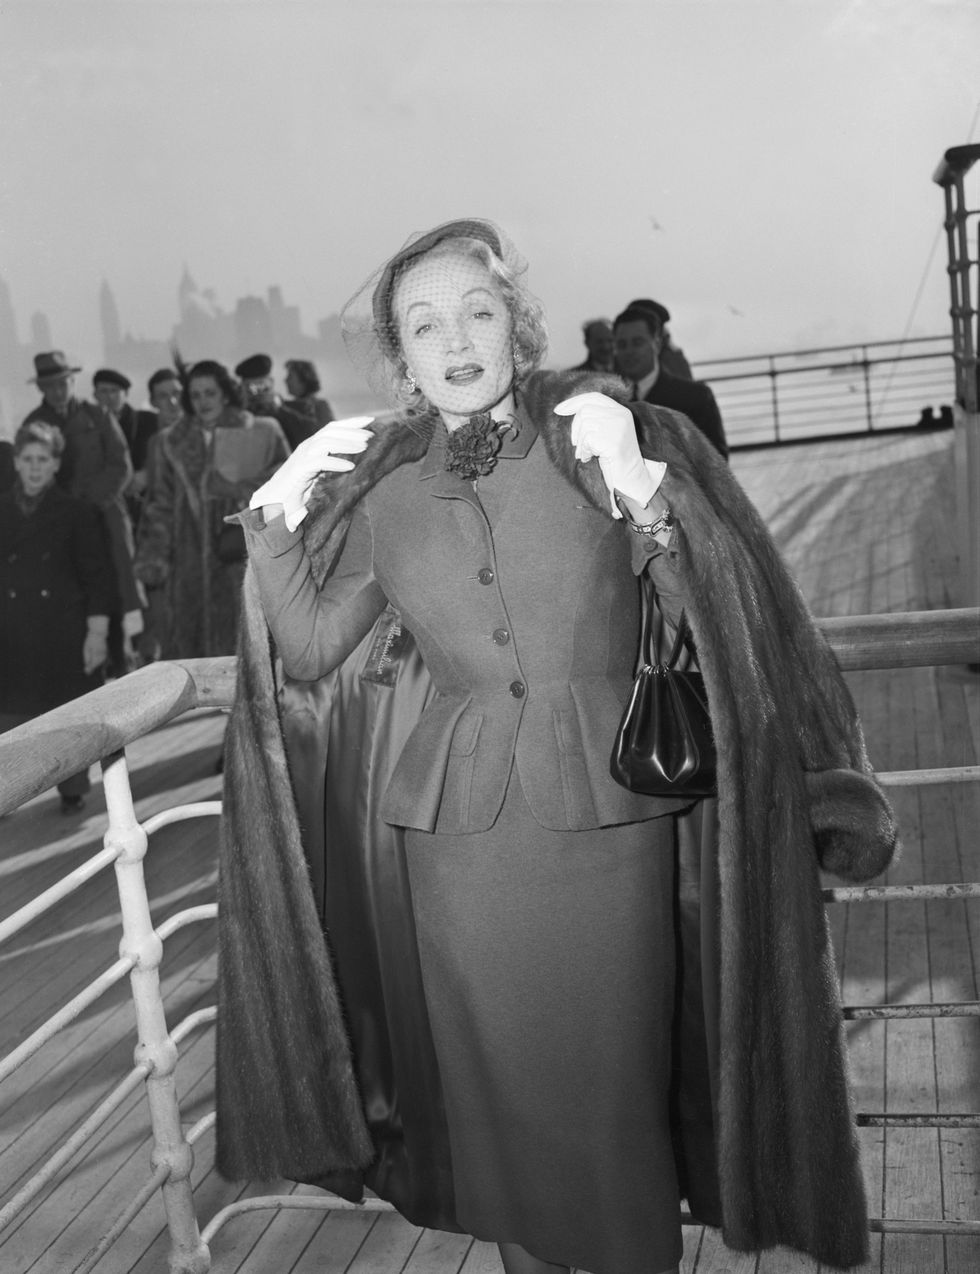 original caption 12211950 new york, new york  actress, marlene dietrich, unquestionably one of the most glamourous grandmothers in the world, shows herself to be little the worse for wear after her arrival at new york aboard the queen elizabeth